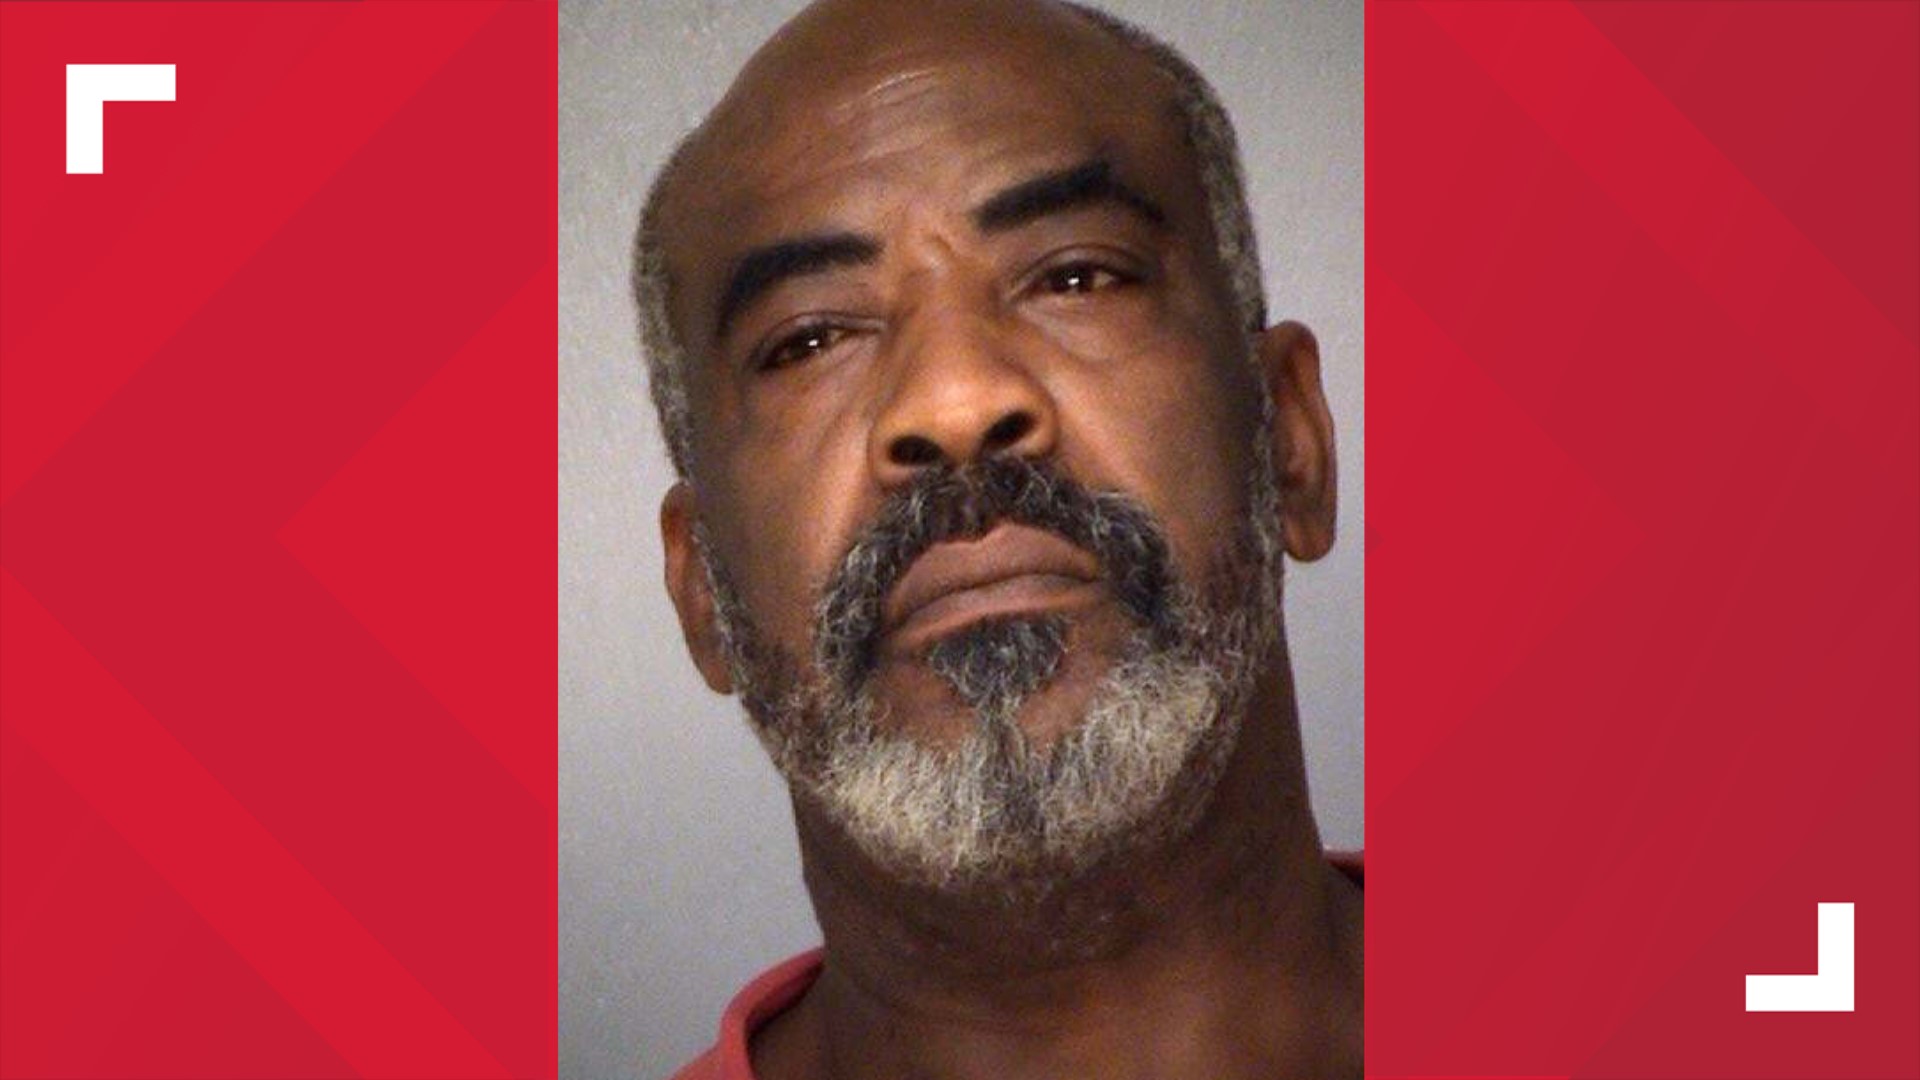 62-year-old Henry Hodge is currently being held at the Bibb County Law Enforcement Center, without bond, for the charge of Aggravated Assault.